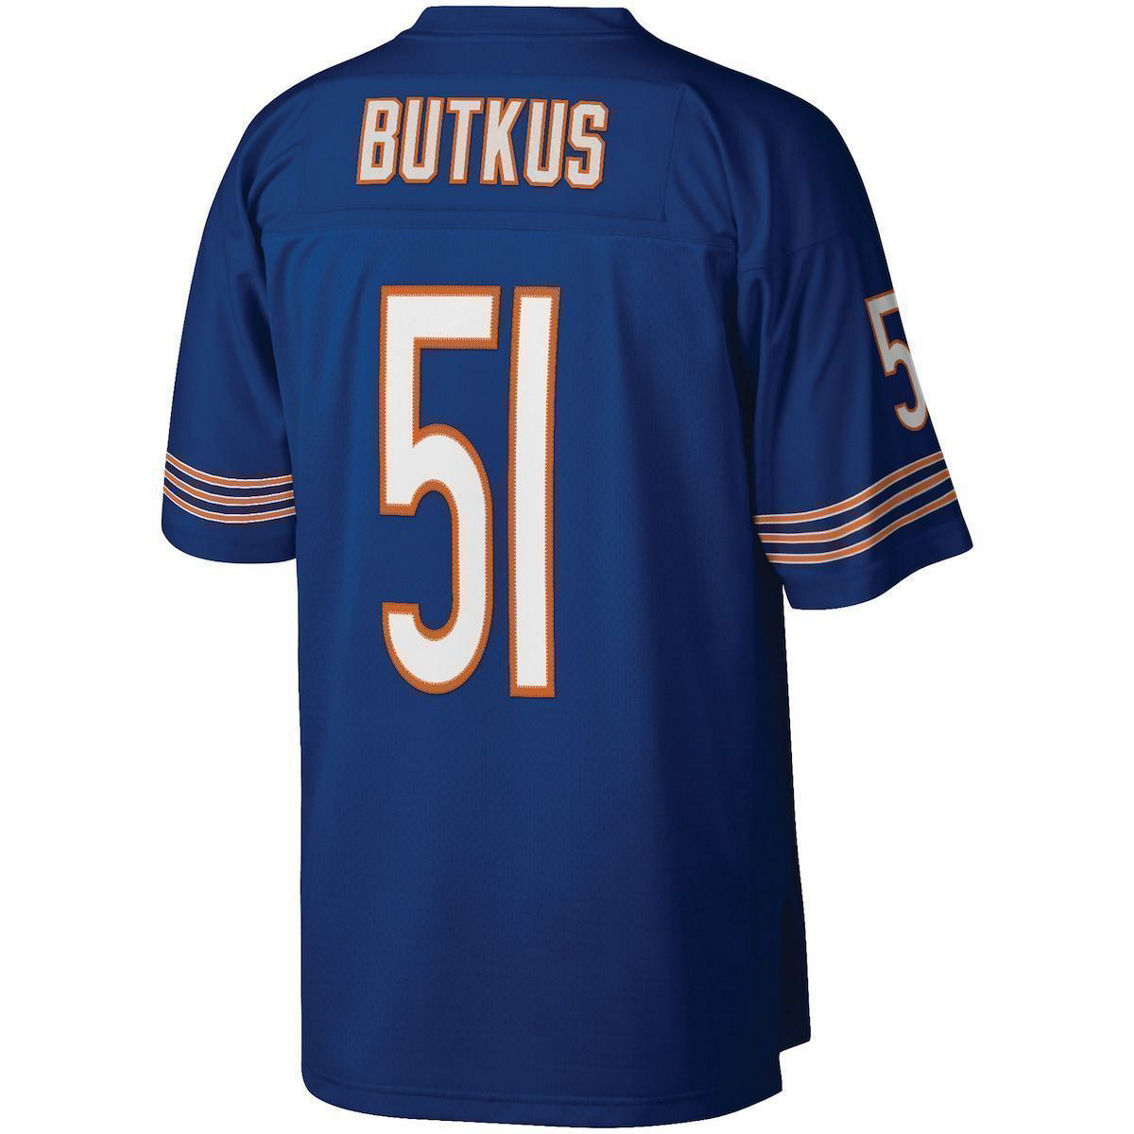 Mitchell & Ness Men's Dick Butkus Navy Chicago Bears Retired Player Legacy Replica Jersey - Image 4 of 4